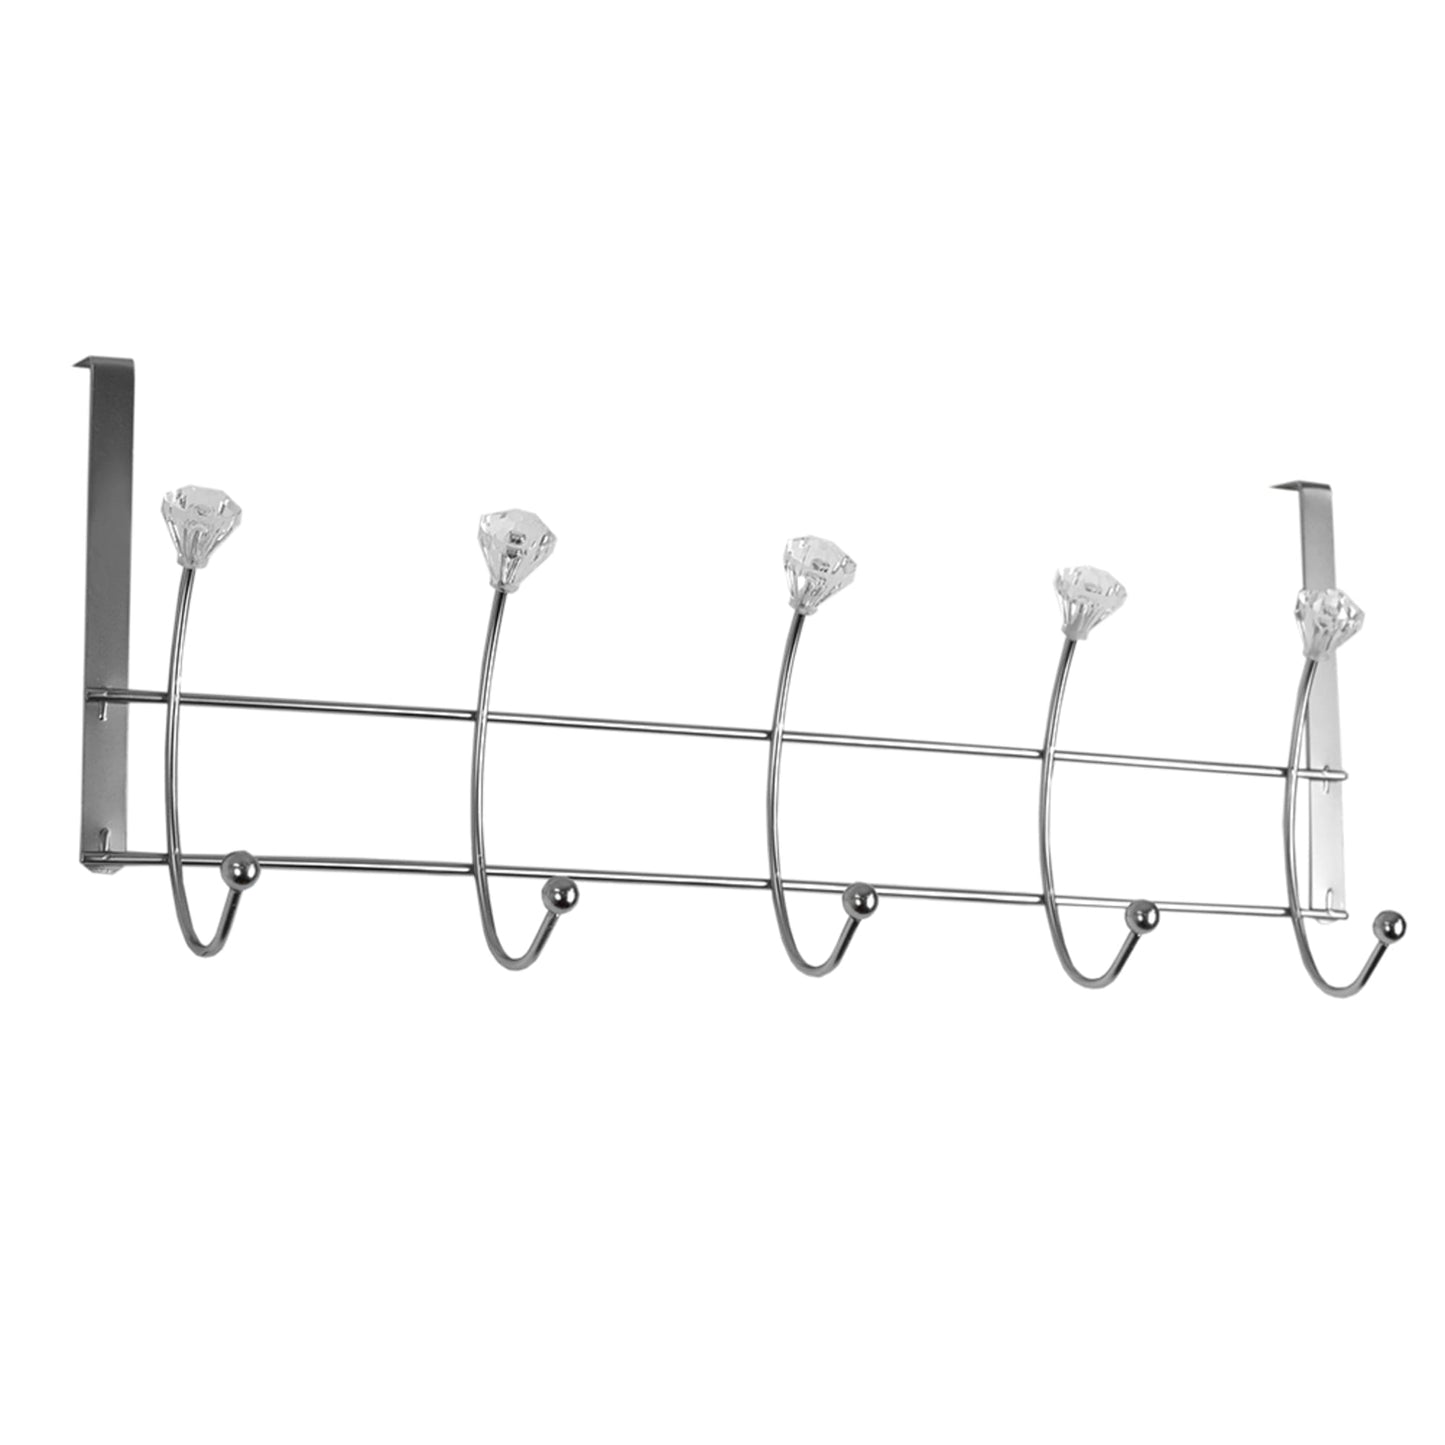 5 Hook Hanging Rack with Crystal Knobs, Chrome